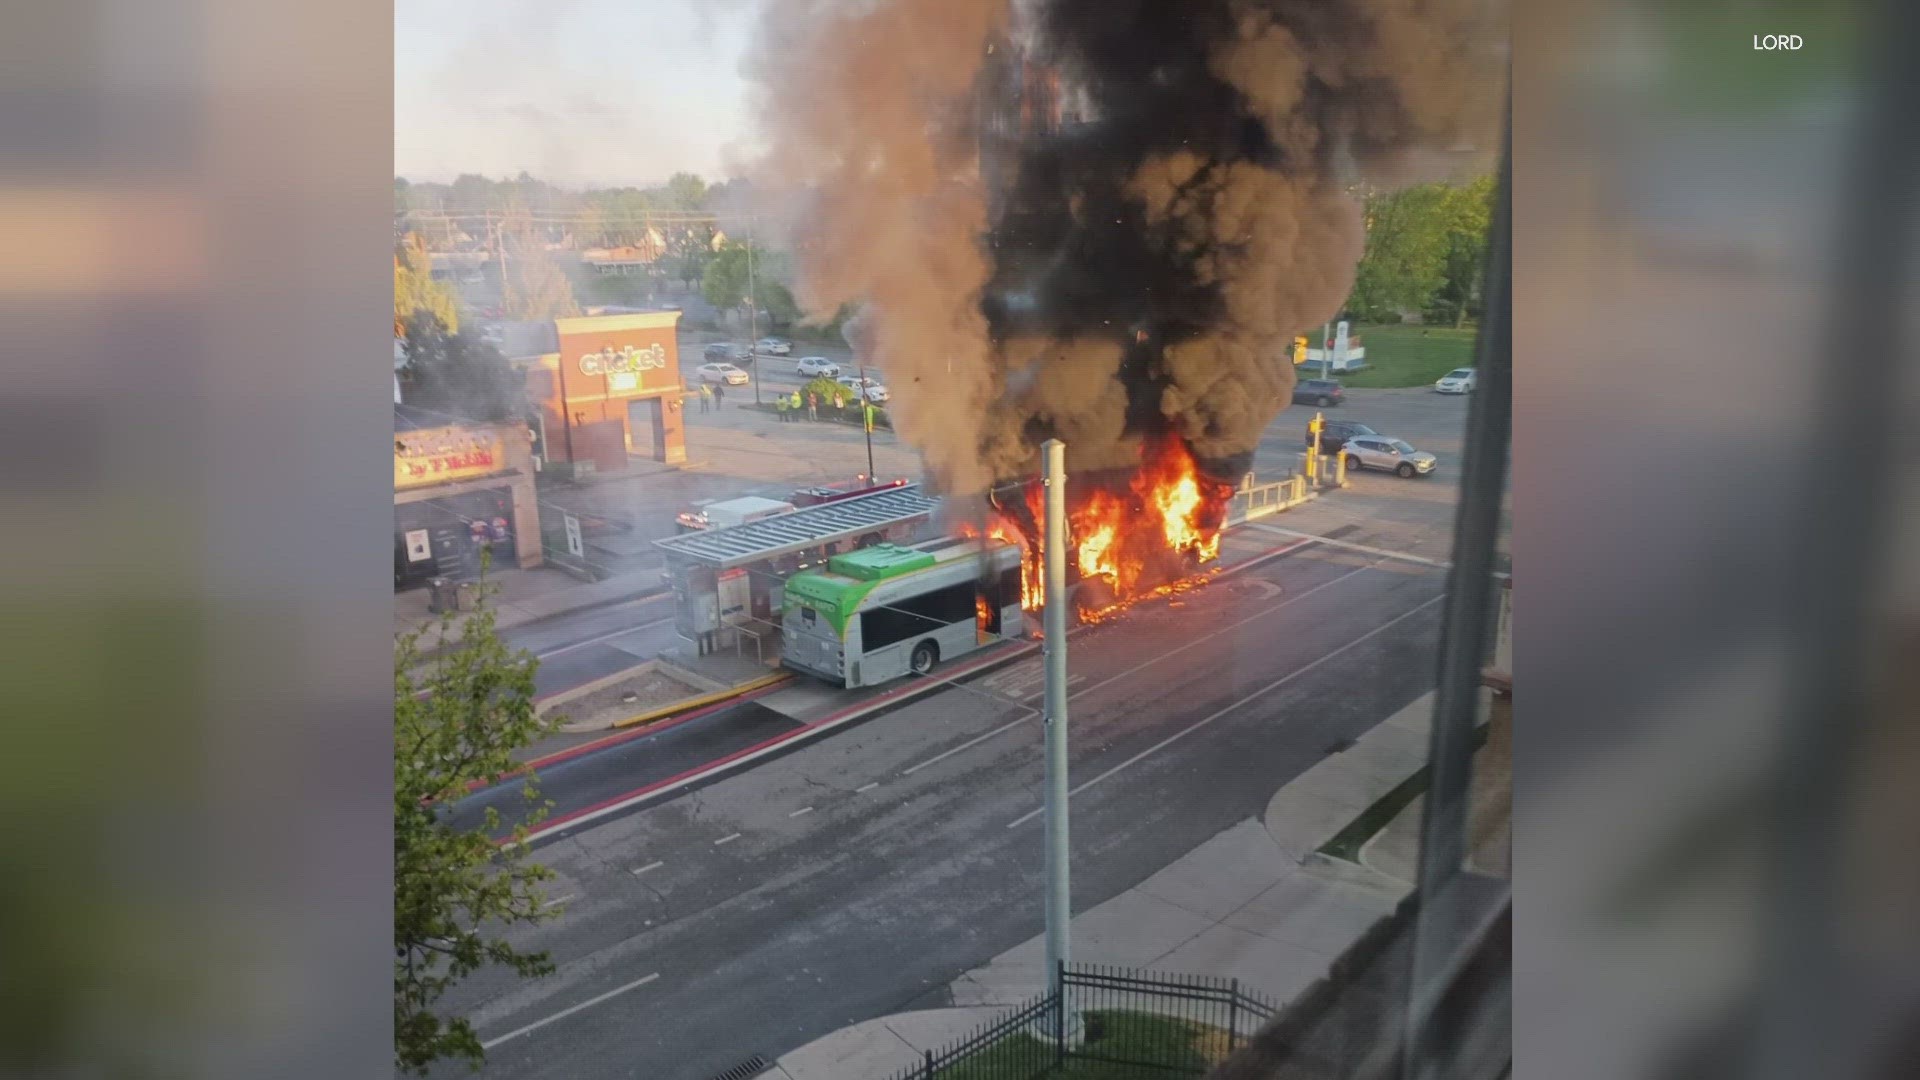 The bus caught fire around 7:10 a.m. Wednesday near North Meridian and East 38th streets.